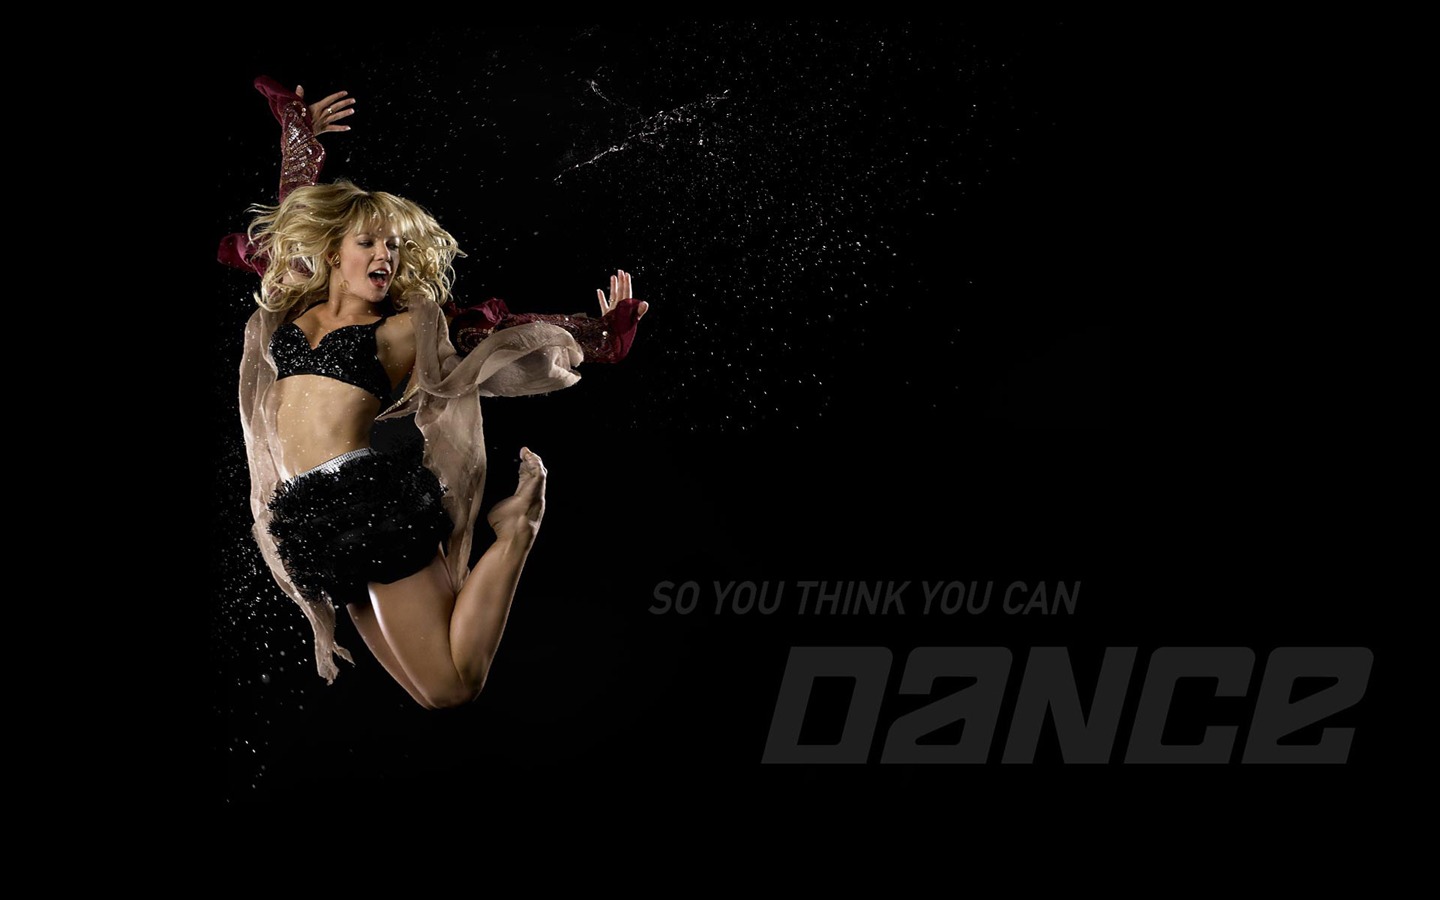 So You Think You Can Dance Wallpaper (1) #7 - 1440x900